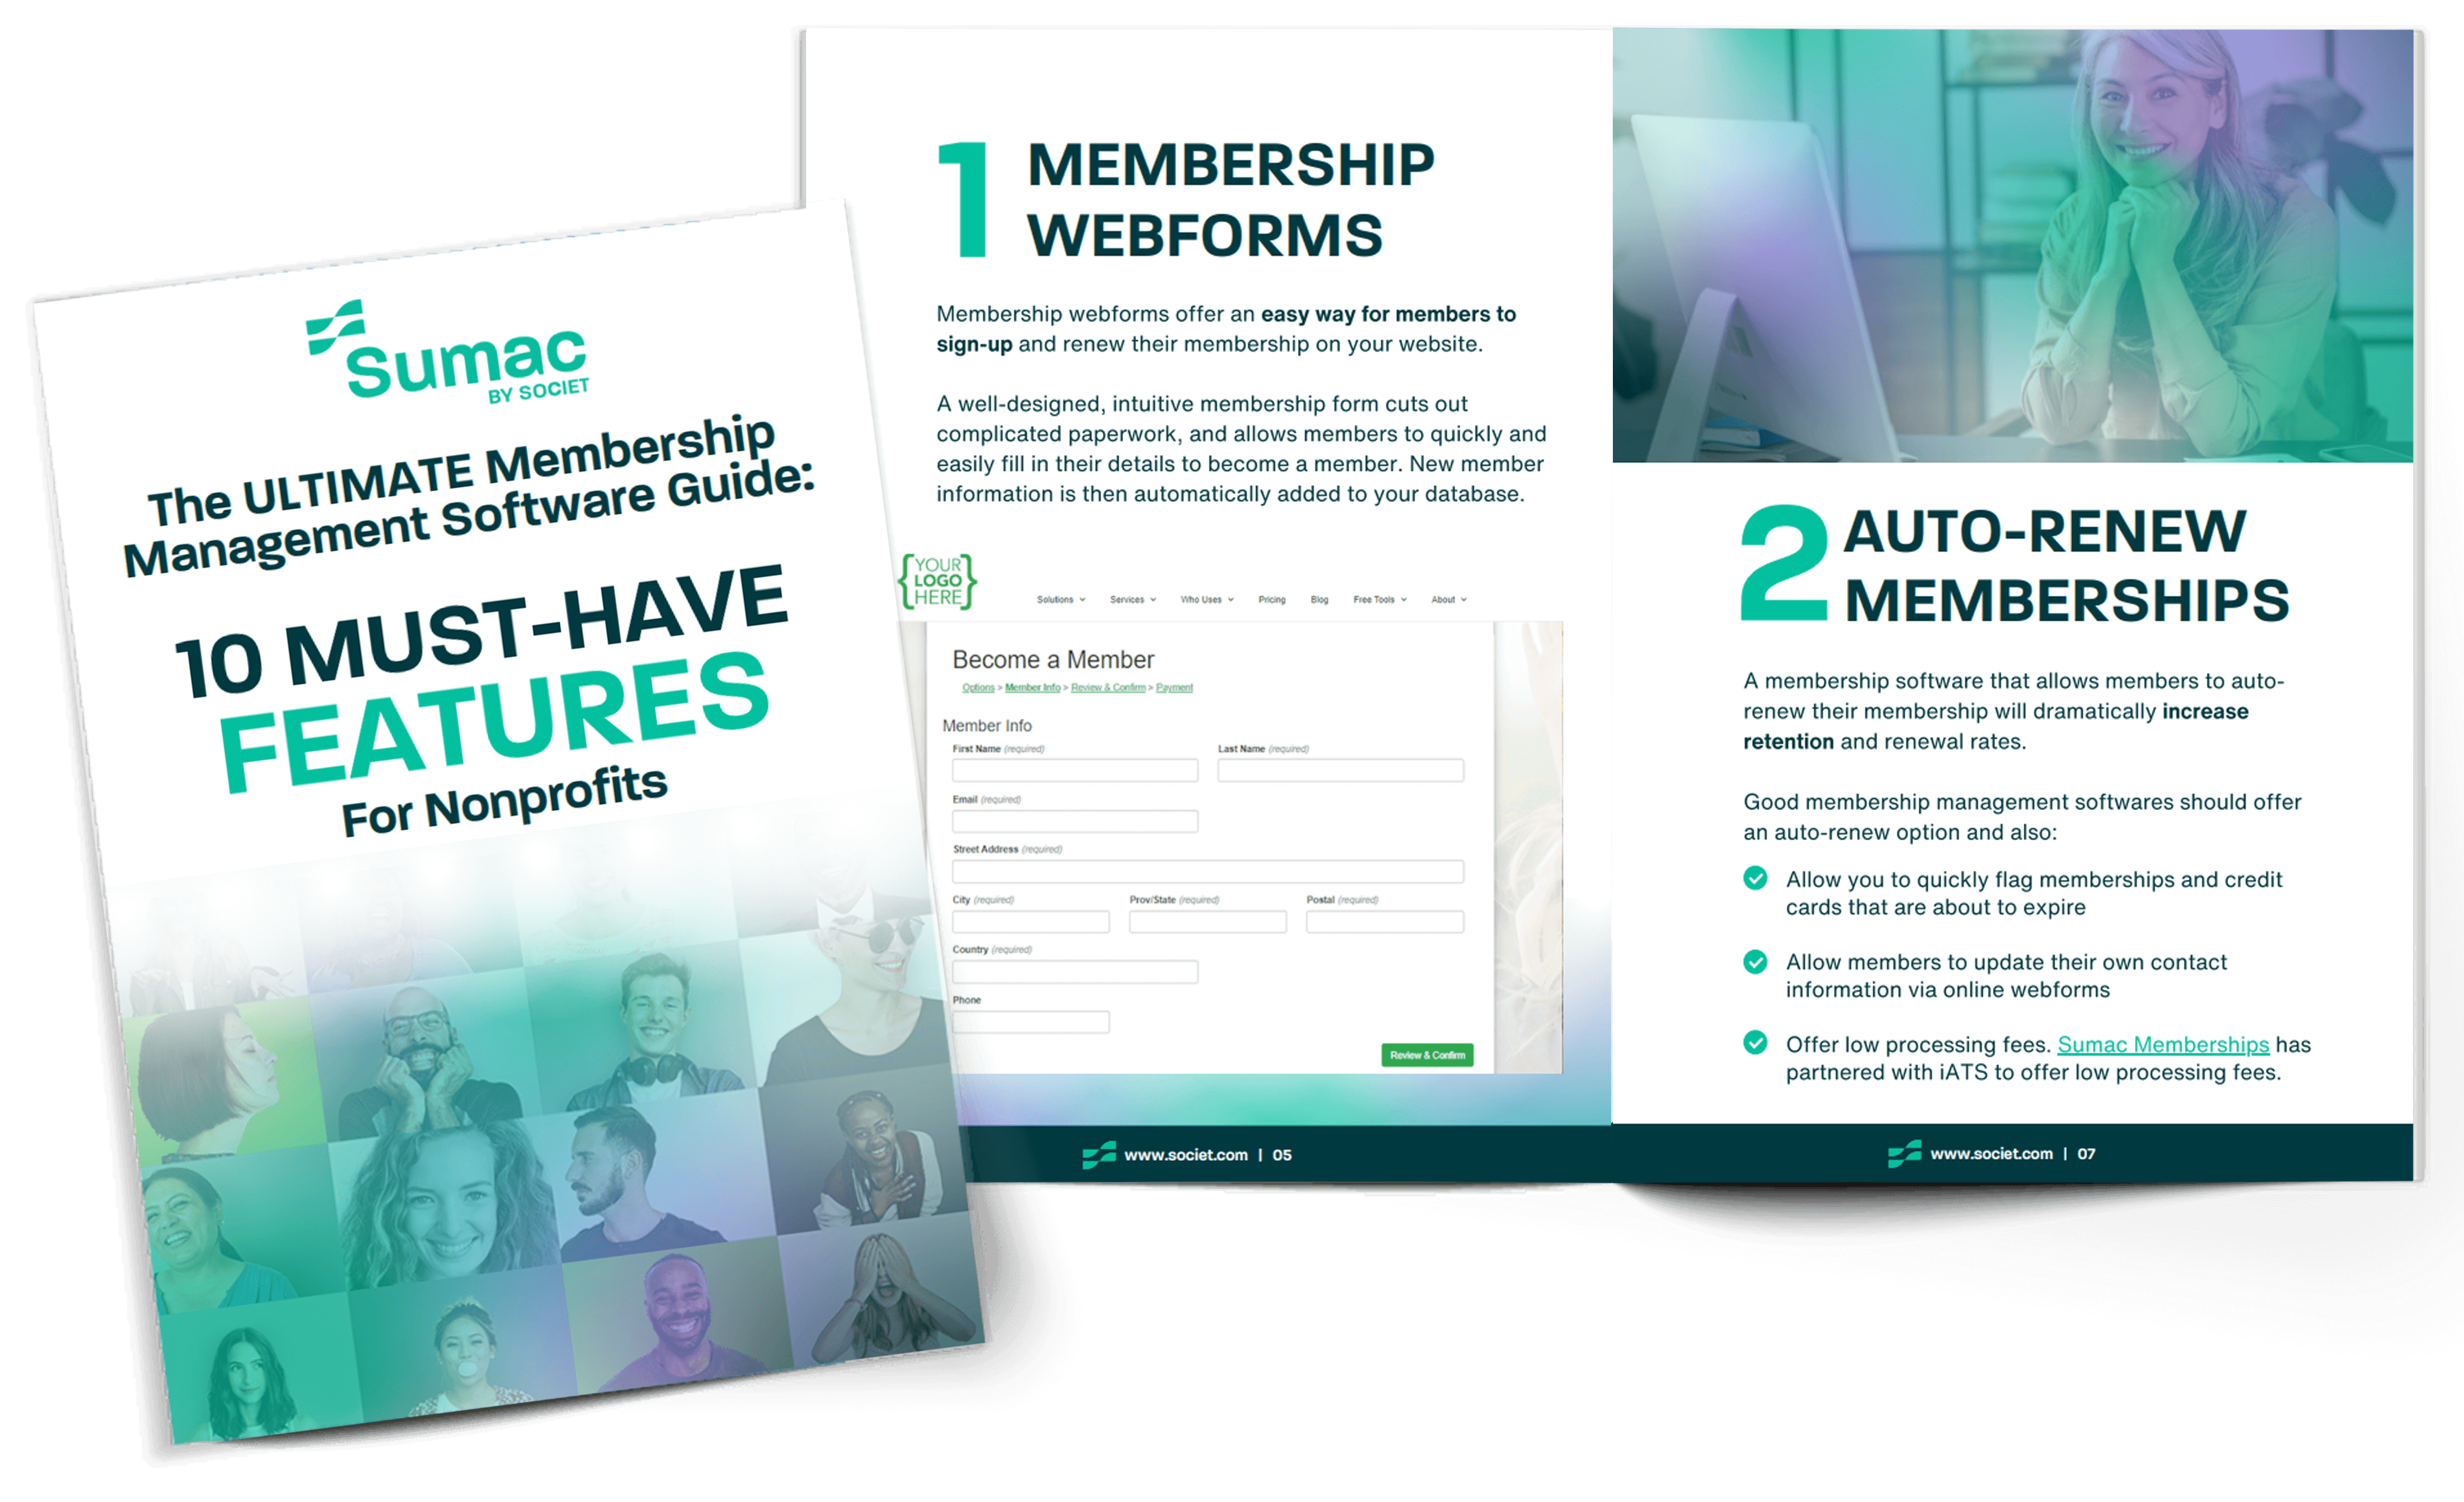 The Ultimate Membership Management Software Guide